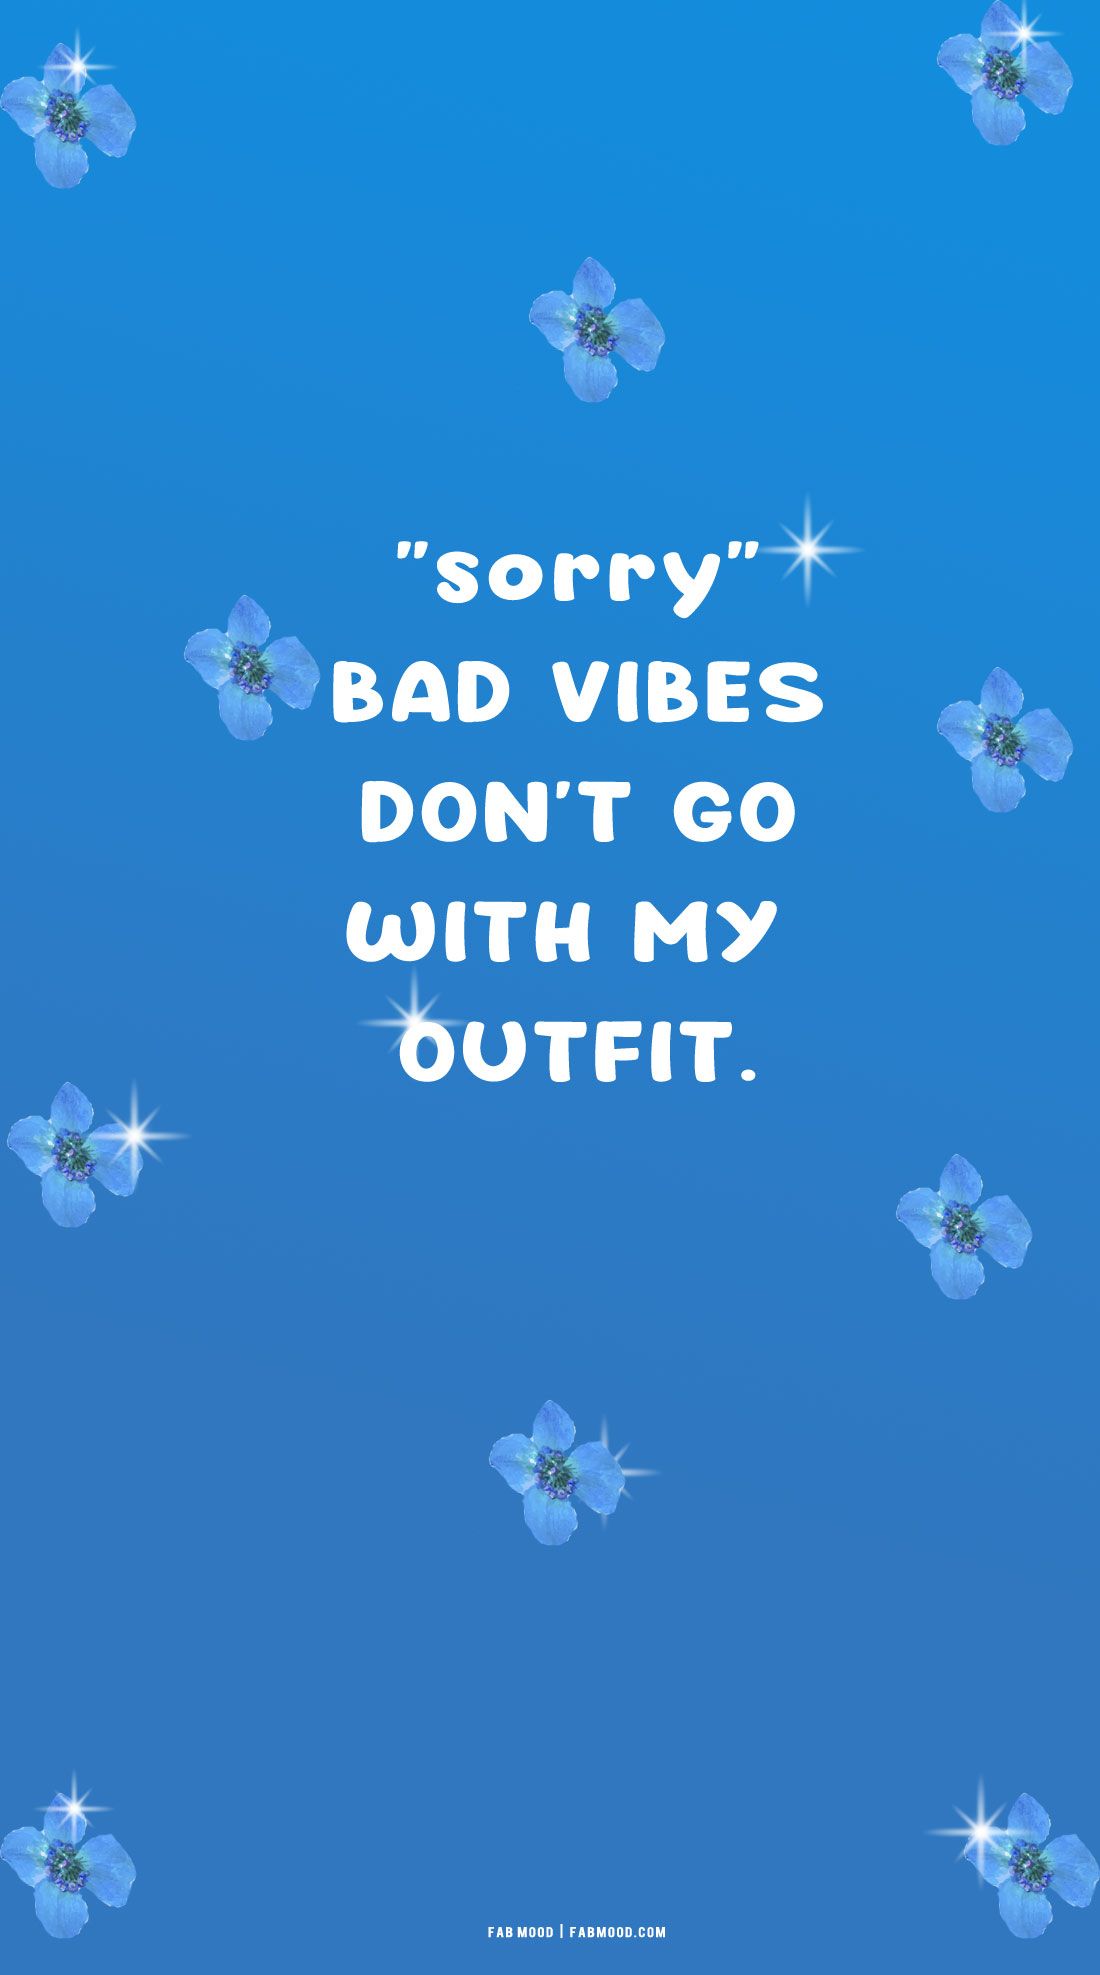 Sorry bad vibes don't go with my outfit - 